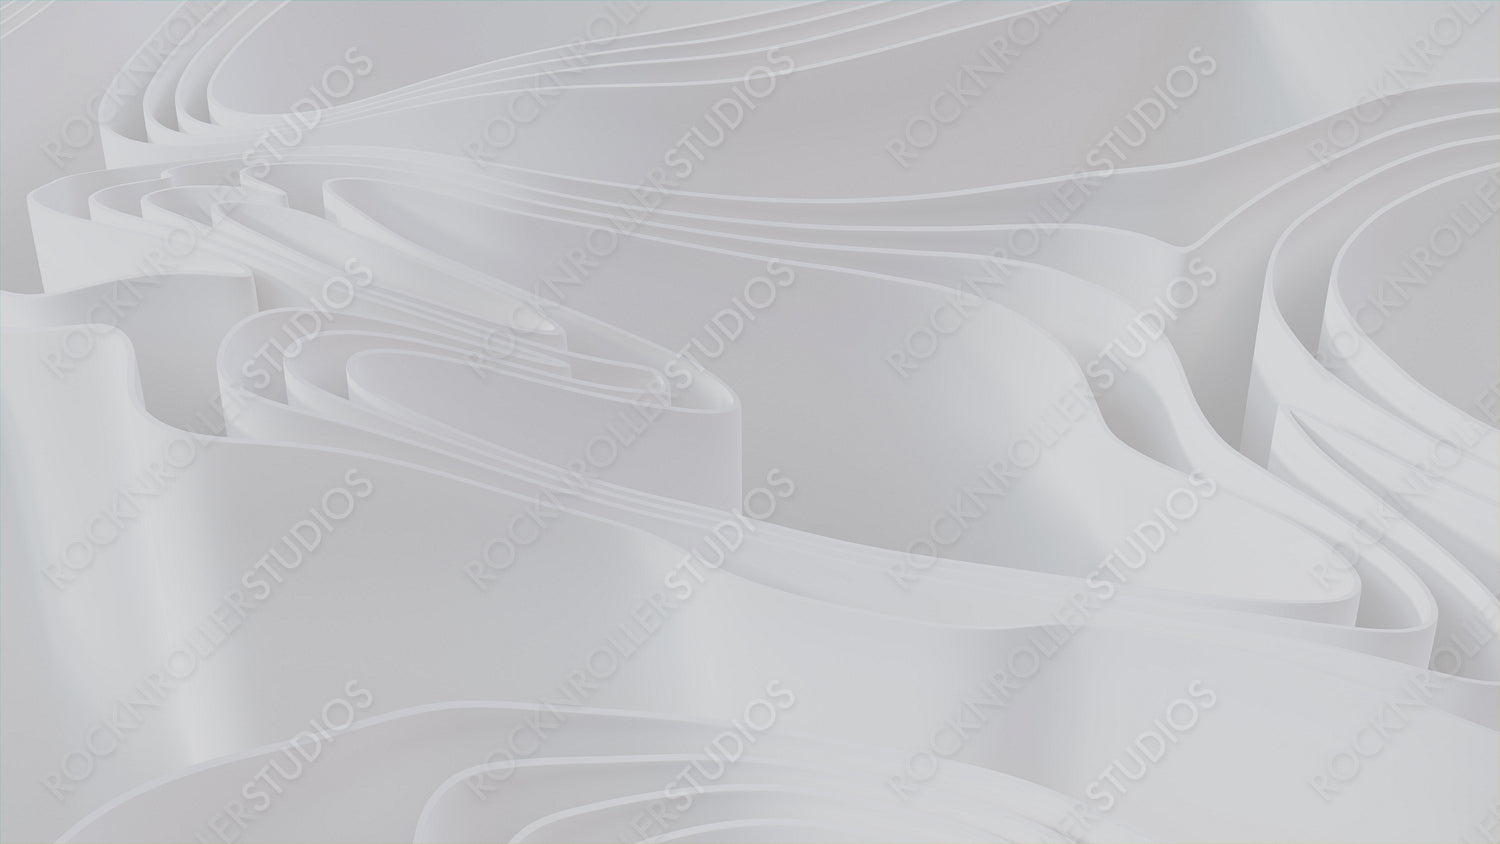 Abstract background made of White 3D Waves. Light 3D Render. 